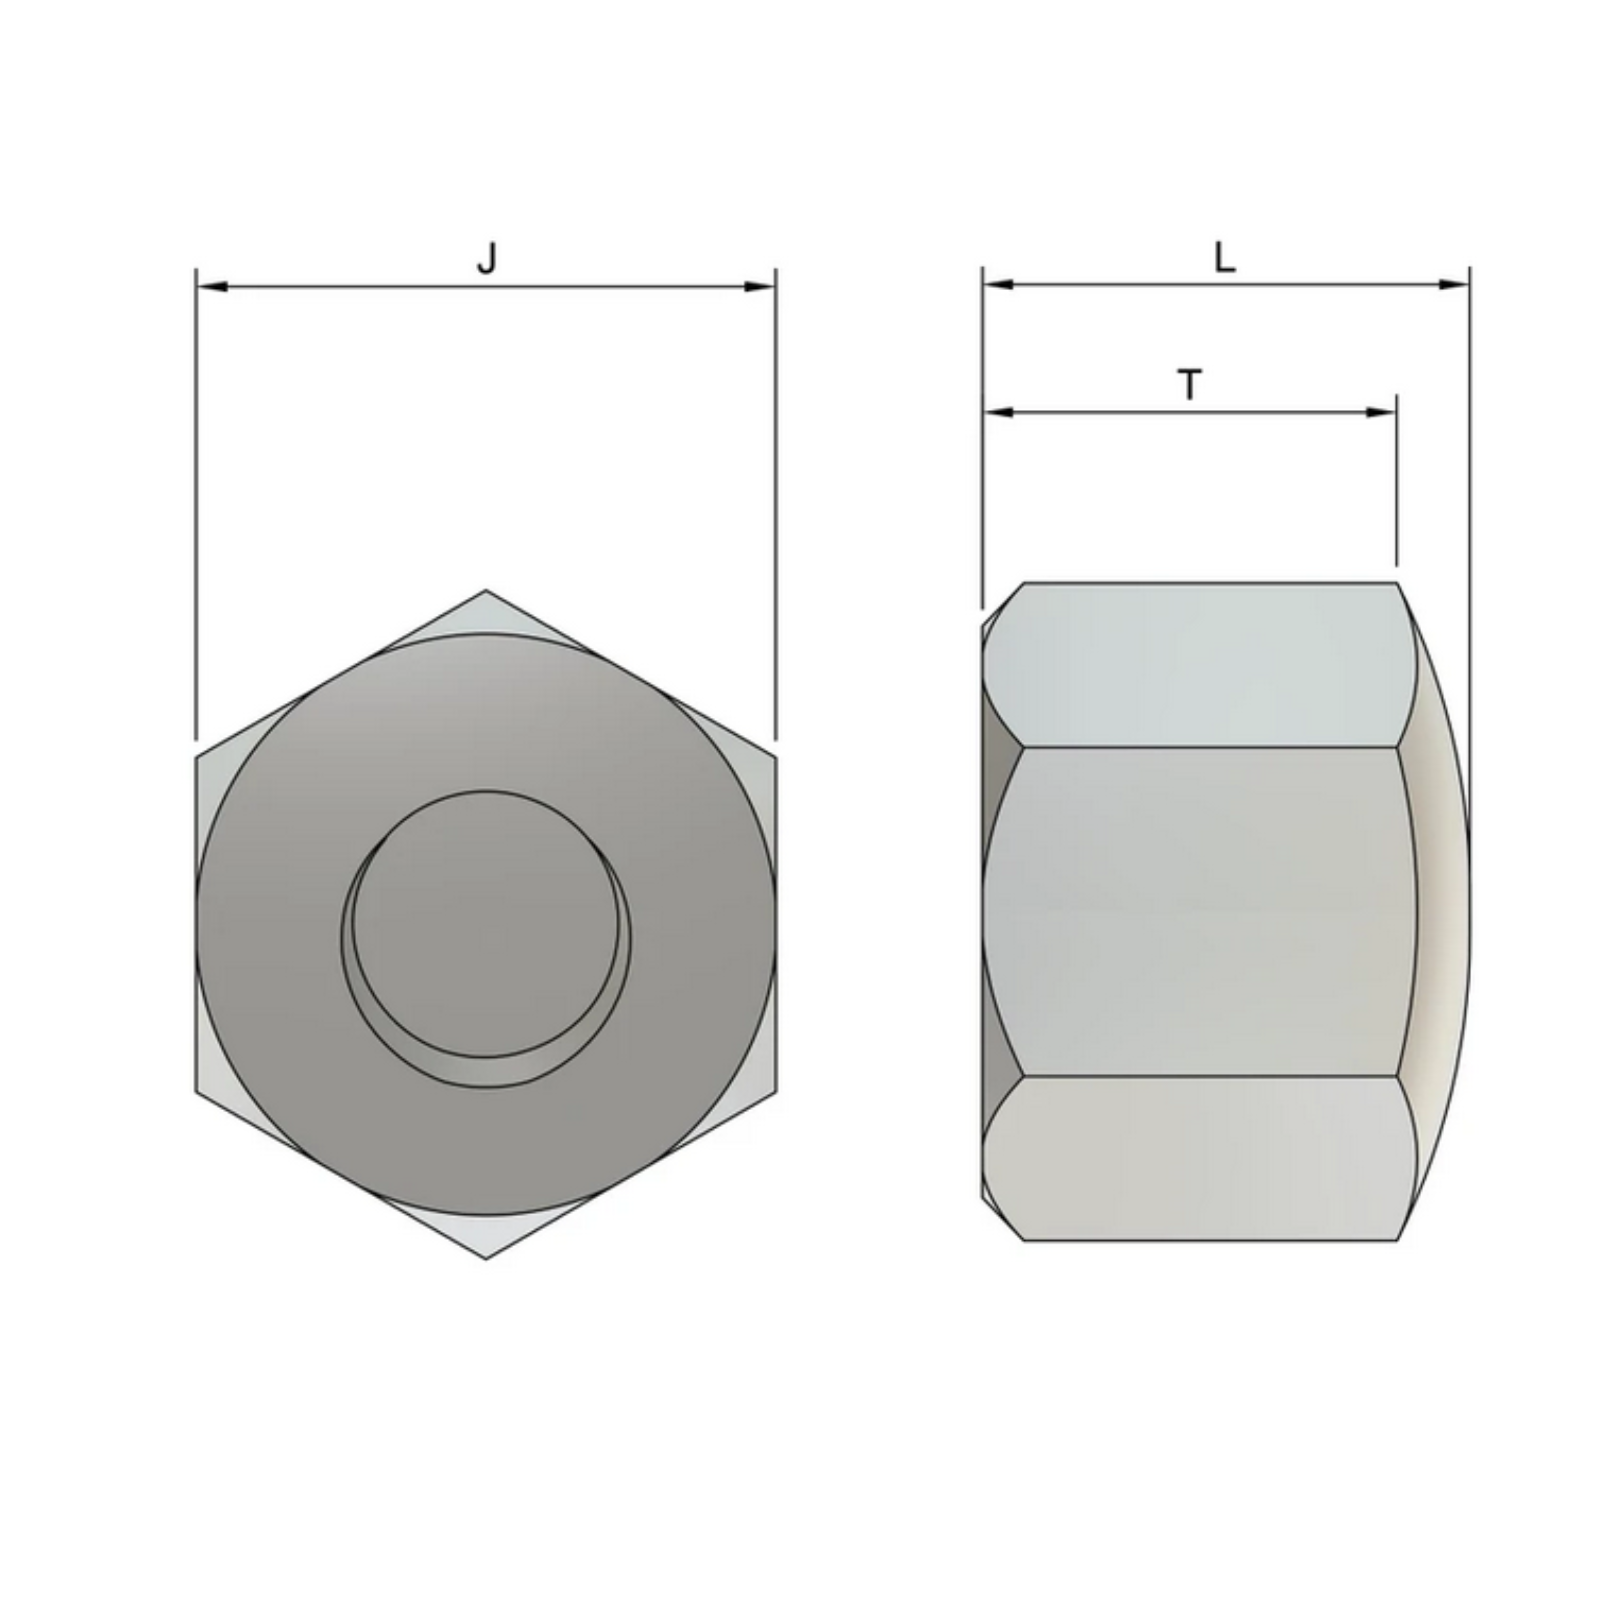 M6 Cap Nuts (DIN 917) - Stainless Steel (A4)